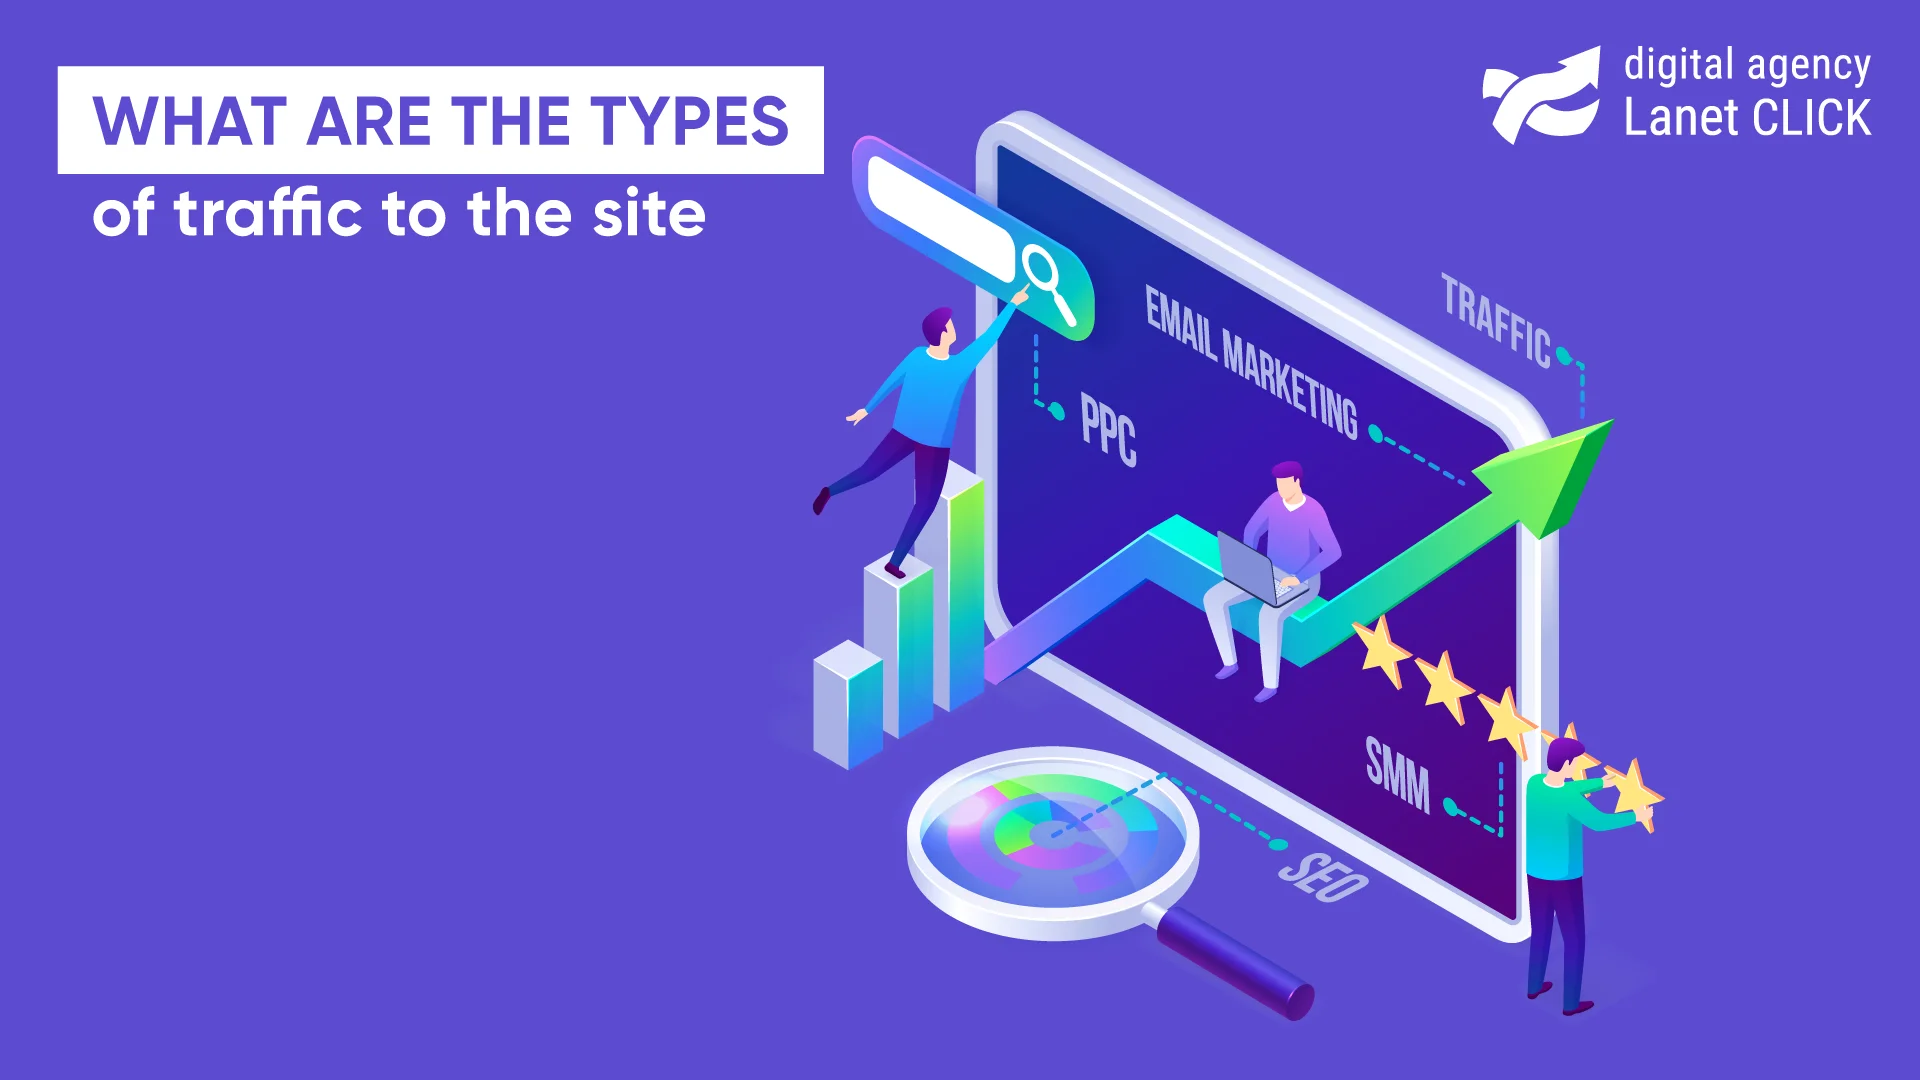 What are the types of traffic to the site